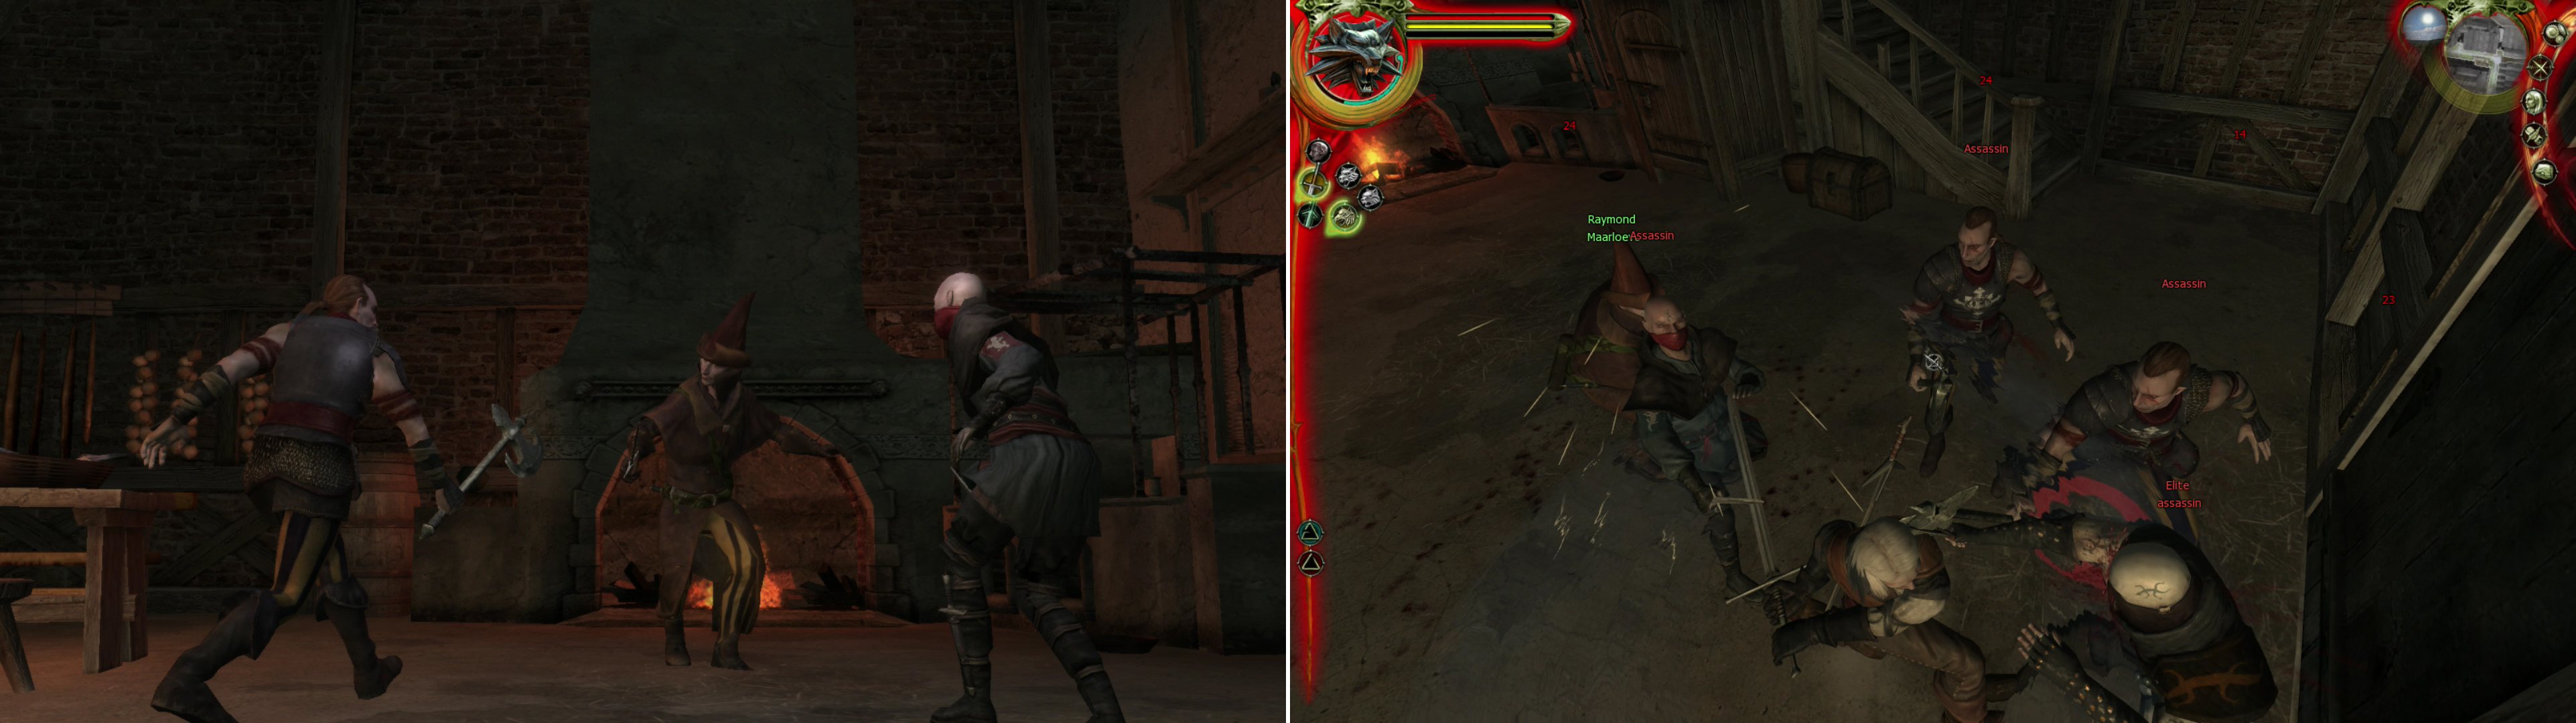 Visit Raymond to find him beset by Salamandra assassins (left). Fortunately he’s got a Witcher ally with a good sense of timing on his side (right).